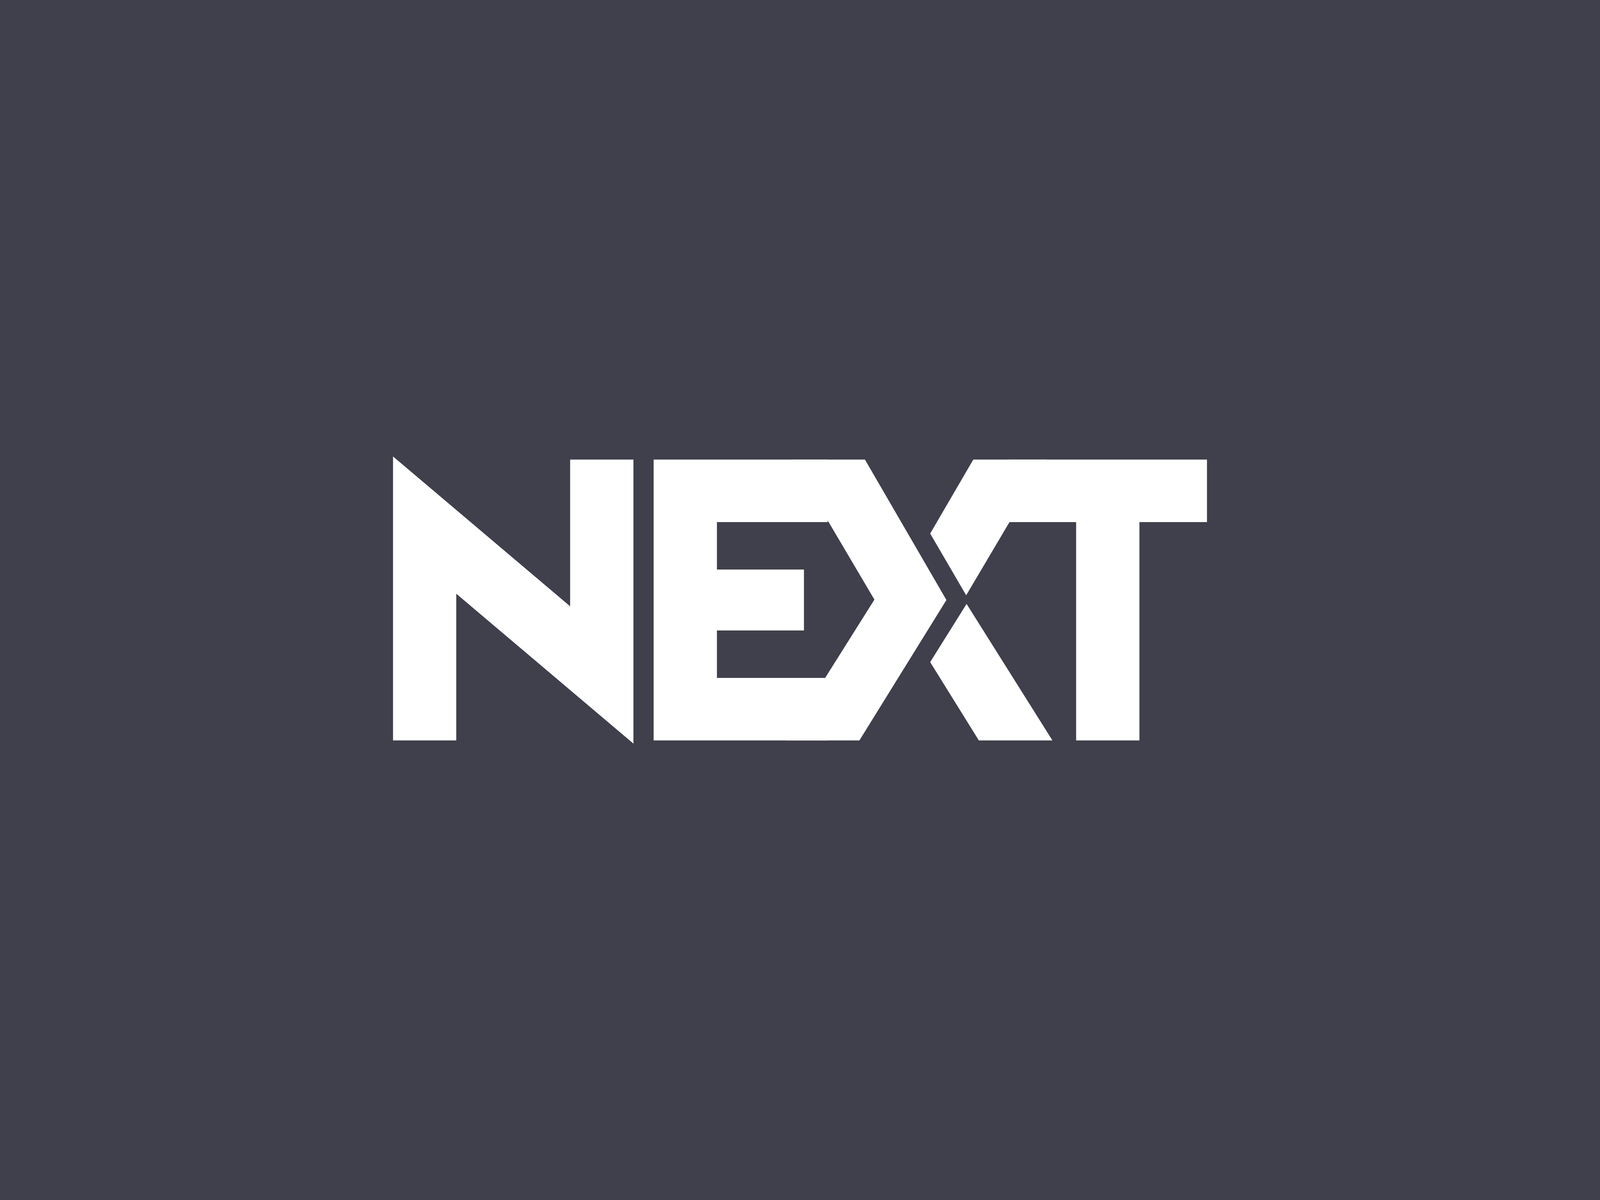 NEXT by Tomi Puustinen on Dribbble